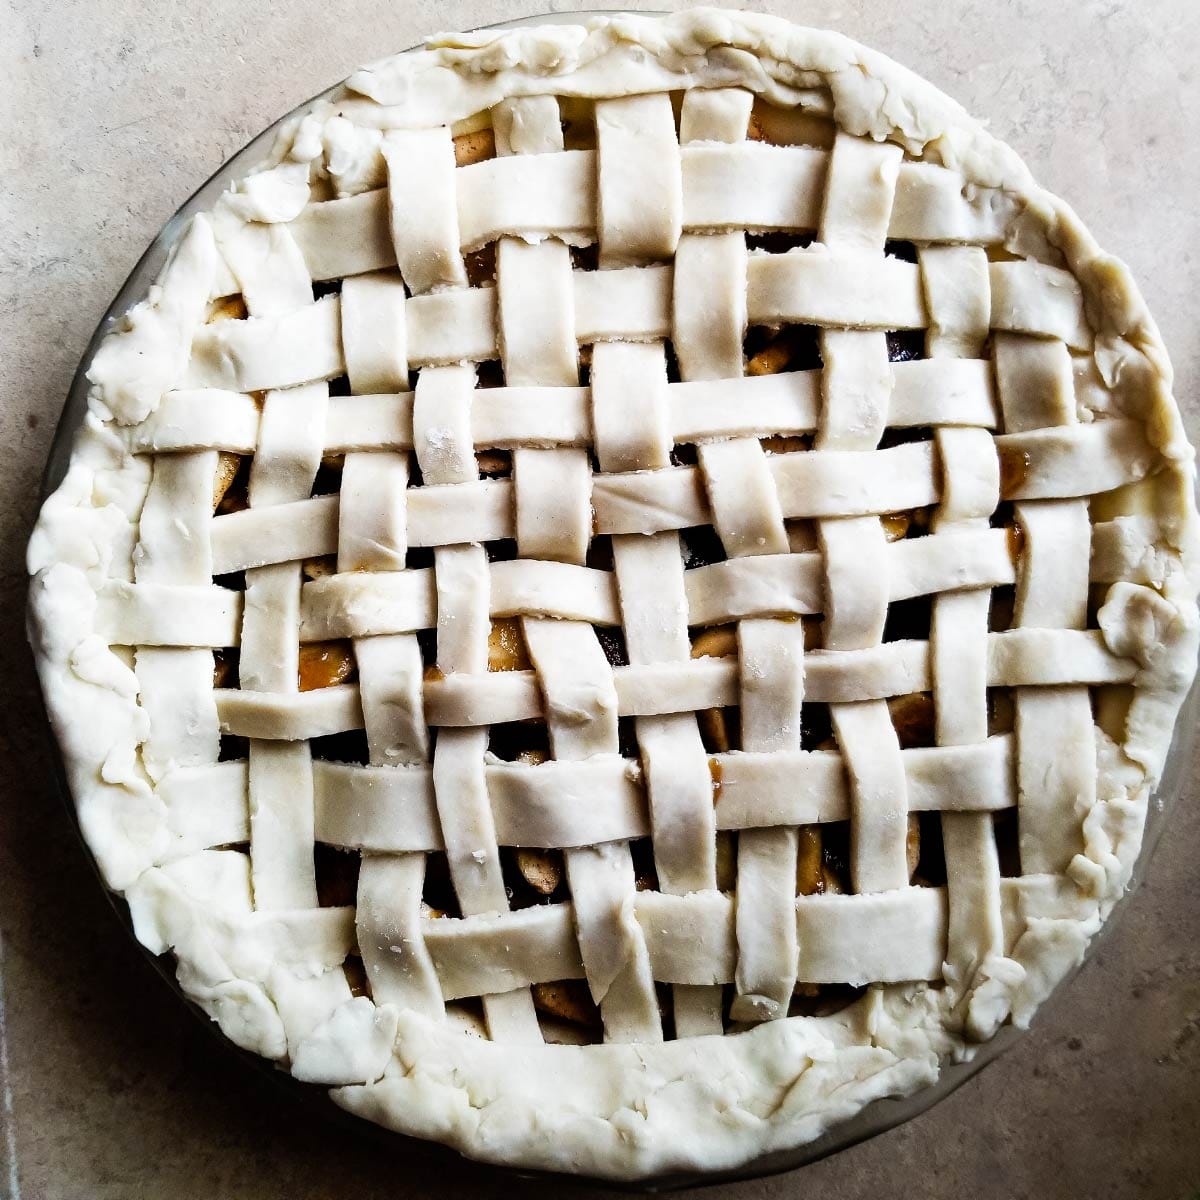 Lattice crust on top of the pie that is ready to go in the oven.